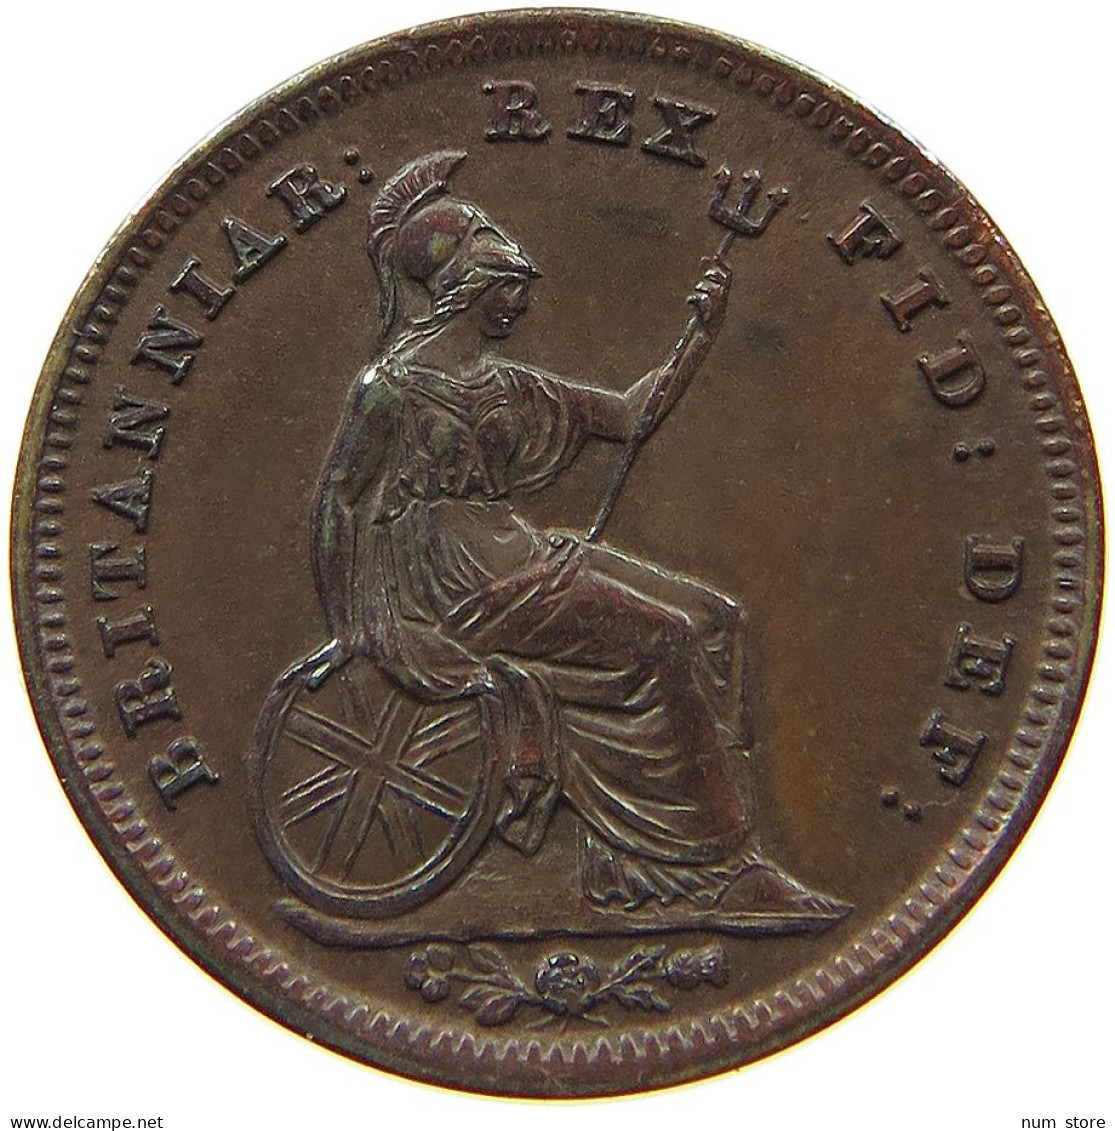 GREAT BRITAIN 1/3 FARTHING 1835 WILLIAM IV. (1830-1837) #t107 0229 - A. 1/4 - 1/3 - 1/2 Farthing